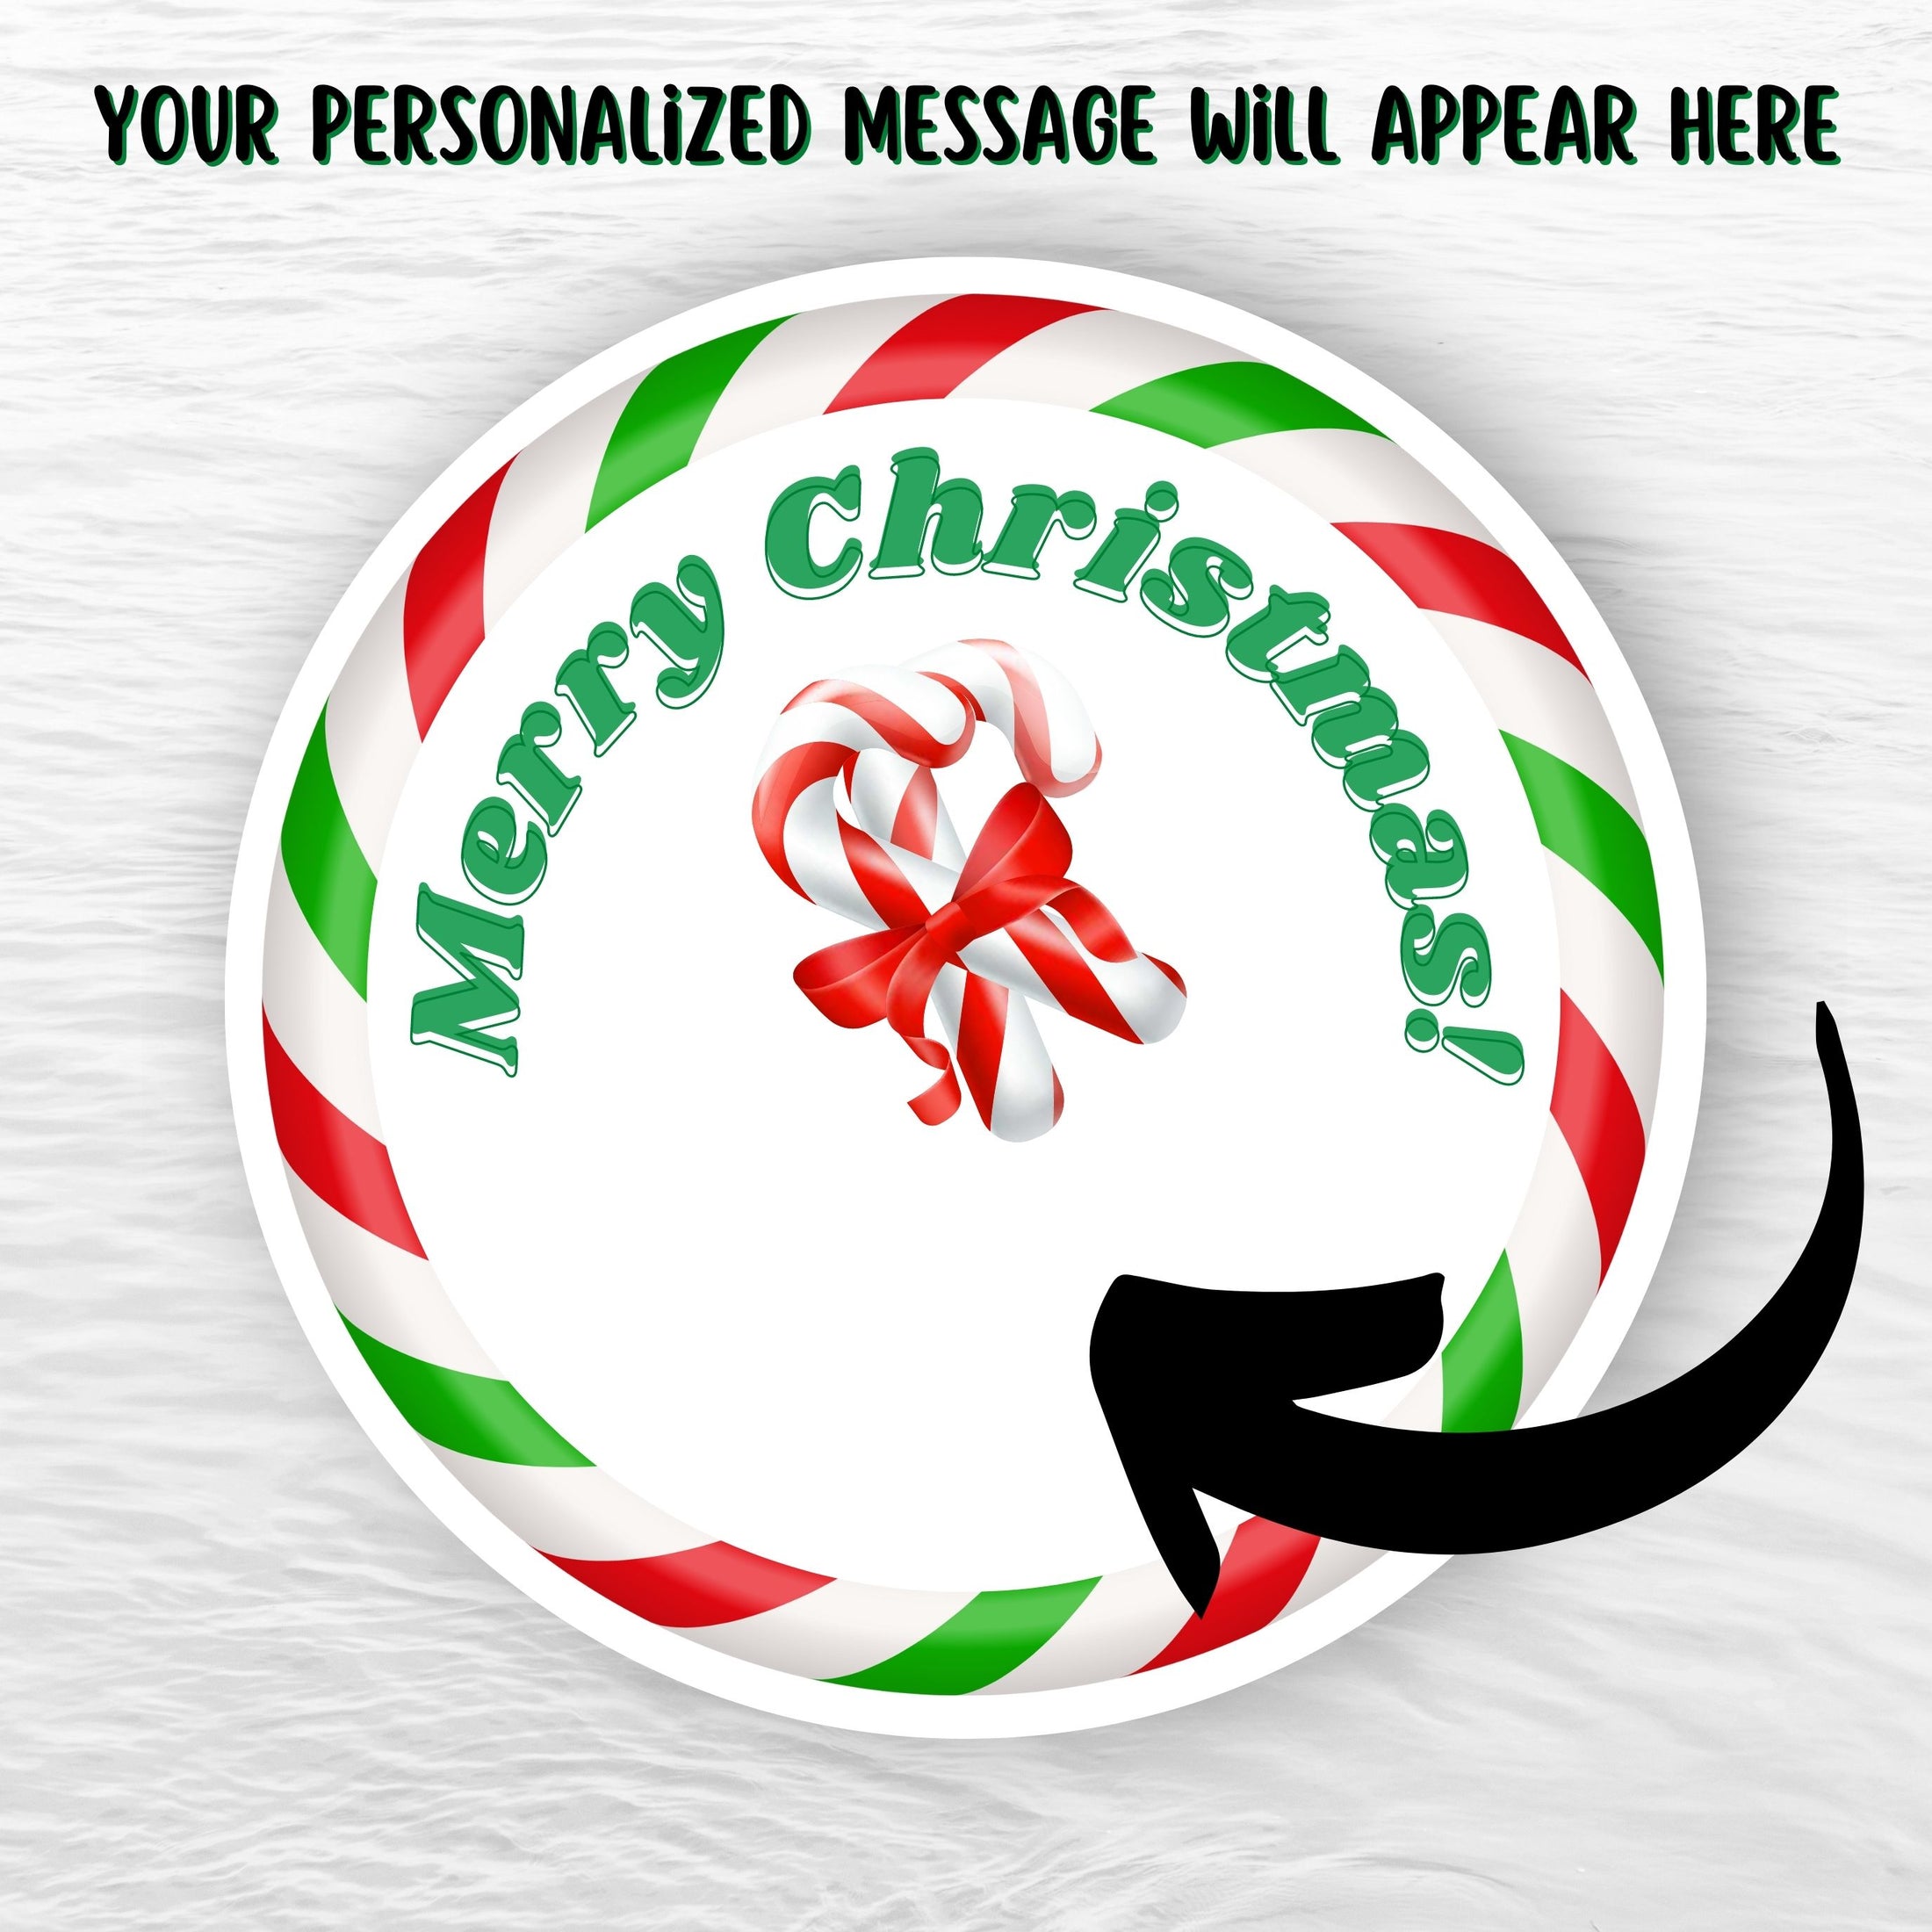 This image shows the holiday sticker with an arrow showing where your personalized message will be printed.